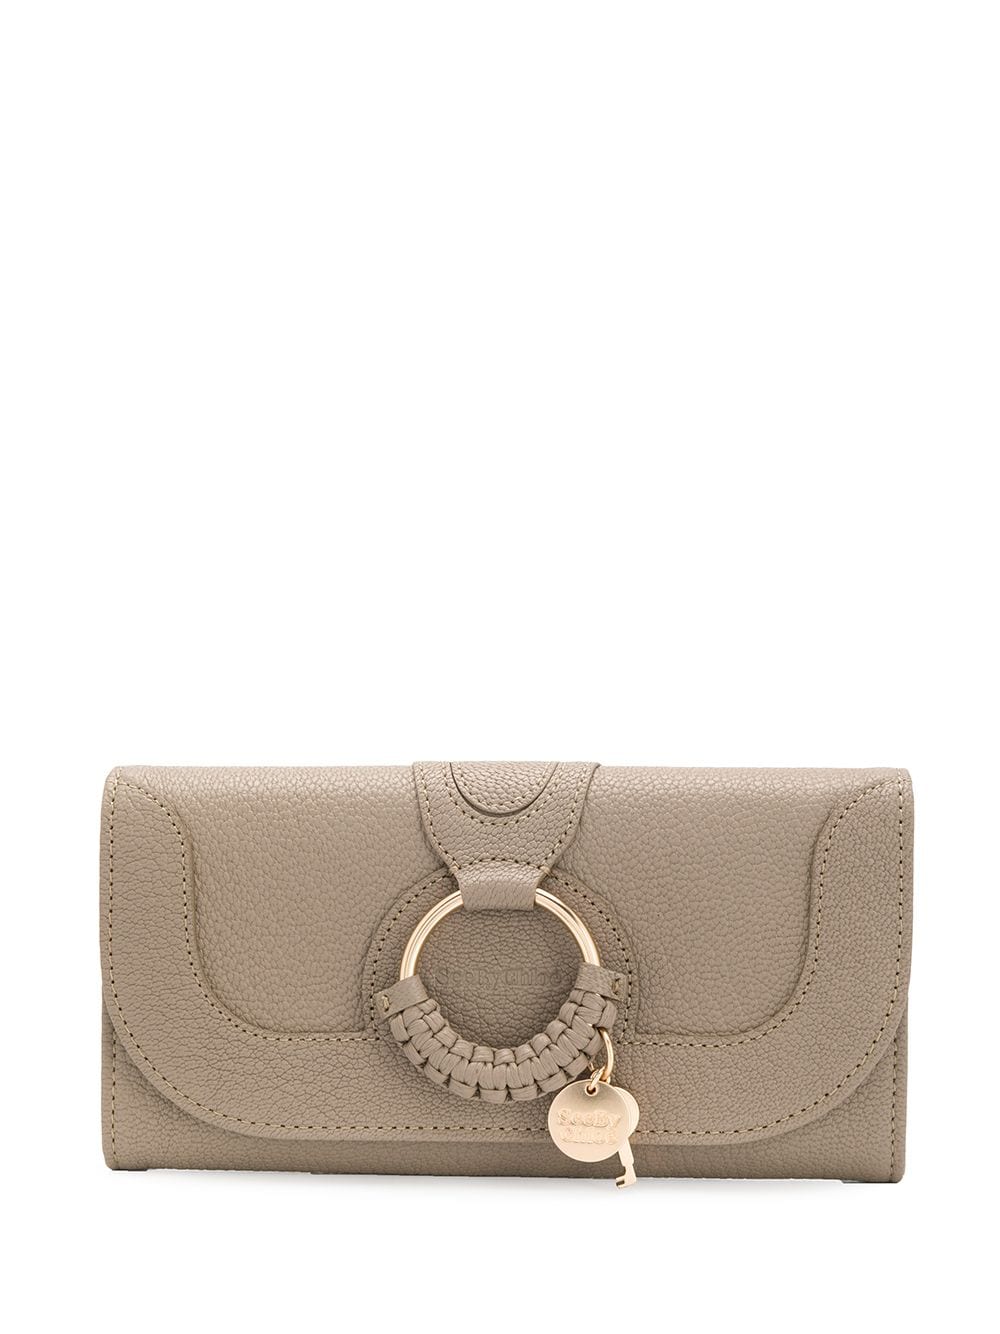 Image 1 of See by Chloé Hana continental wallet